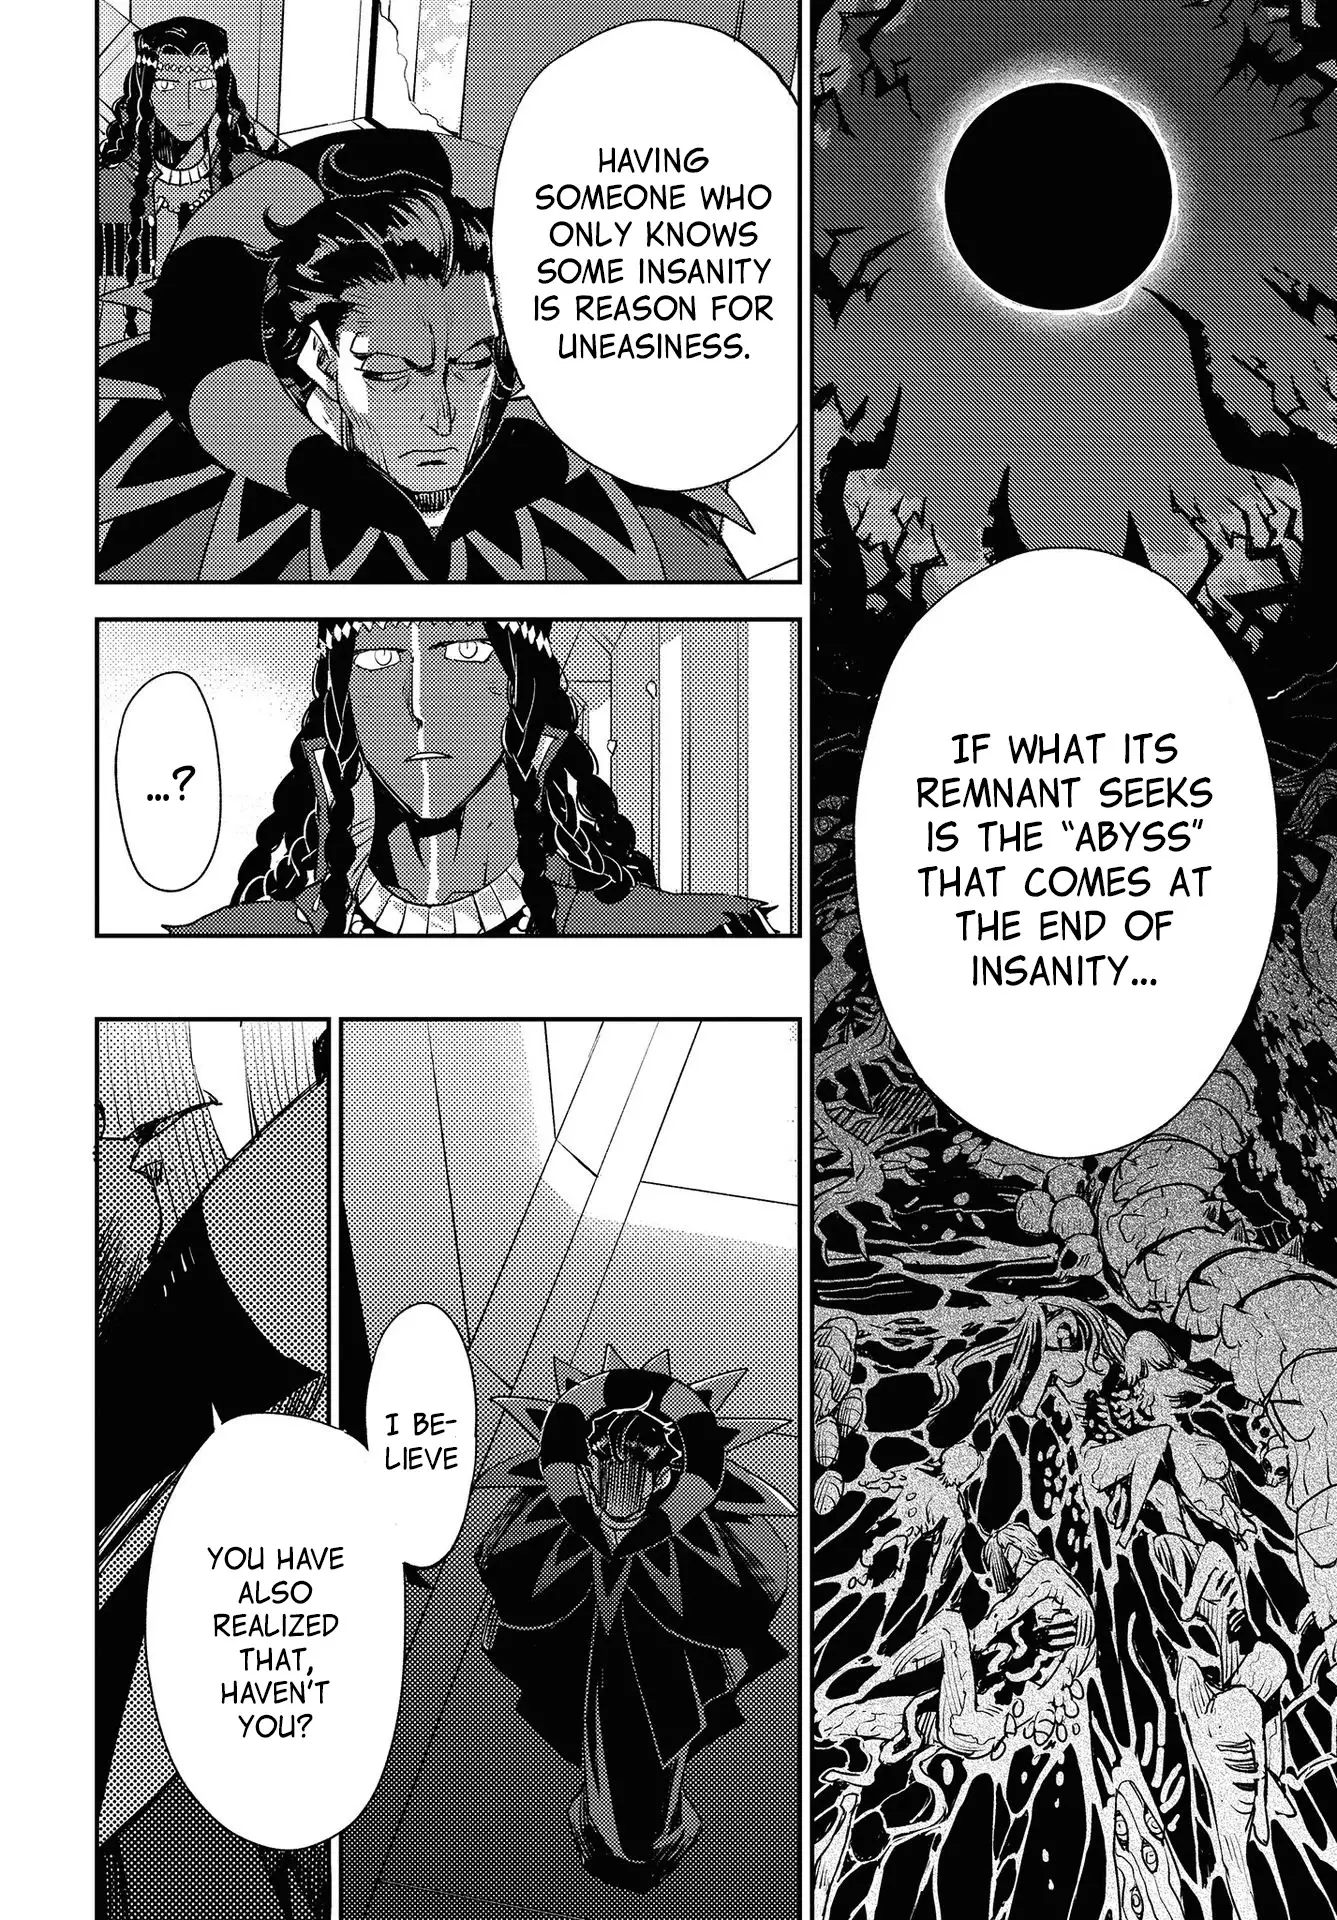 Fate/grand Order: Epic Of Remnant - Subspecies Singularity Iv: Taboo Advent Salem: Salem Of Heresy - 17 page 8